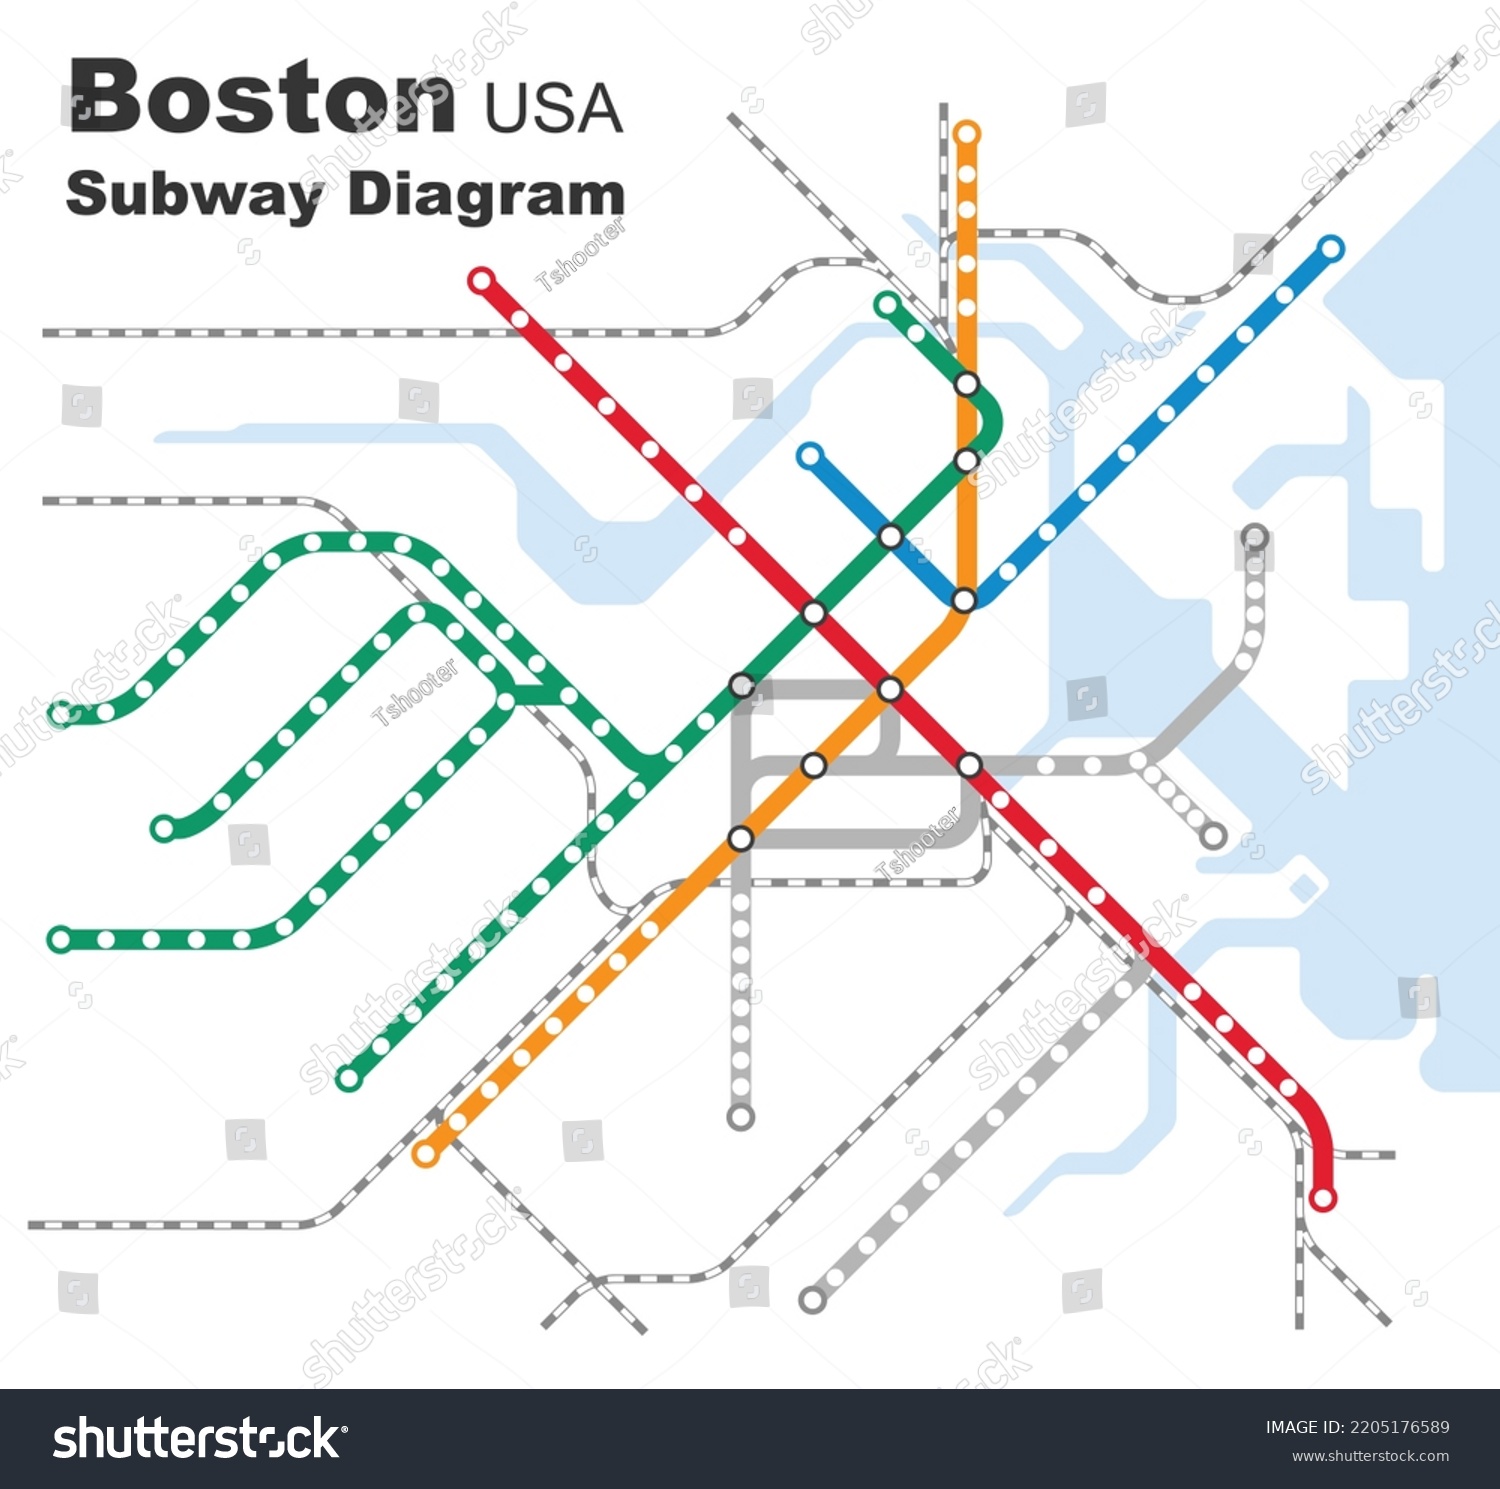 SVG of Layered editable vector illustration of the subway diagram of Boston,USA. svg